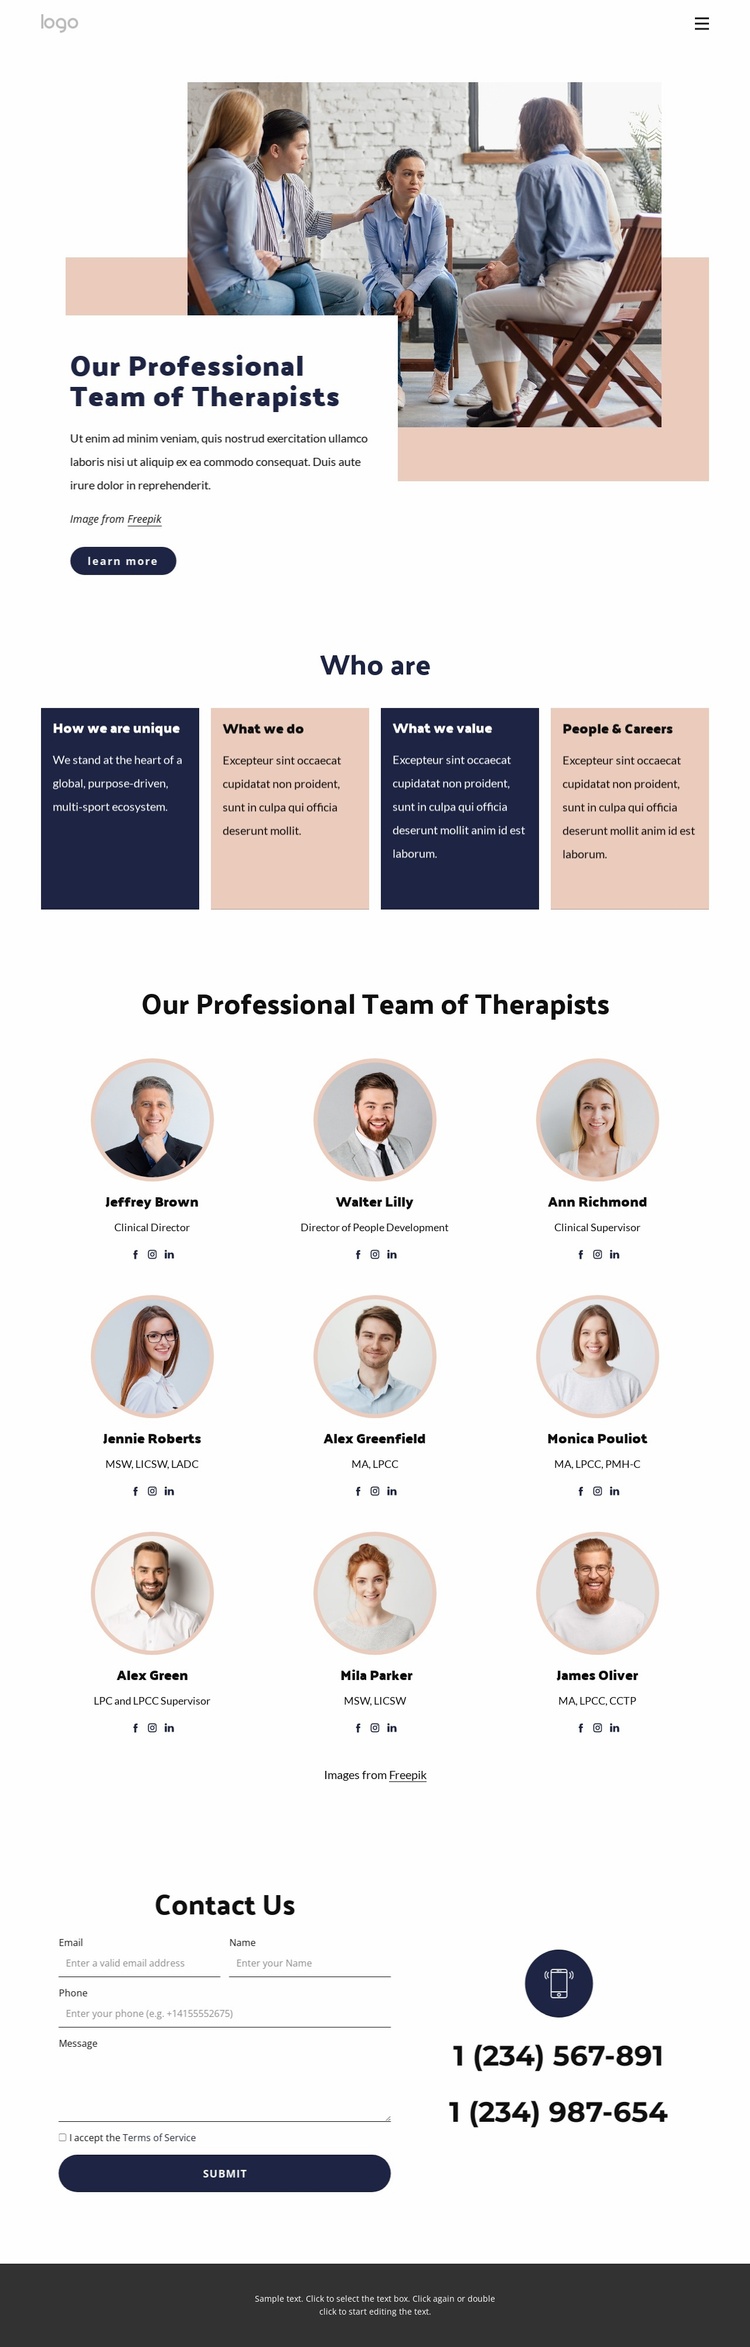 Our professional team of therapists Ecommerce Website Design